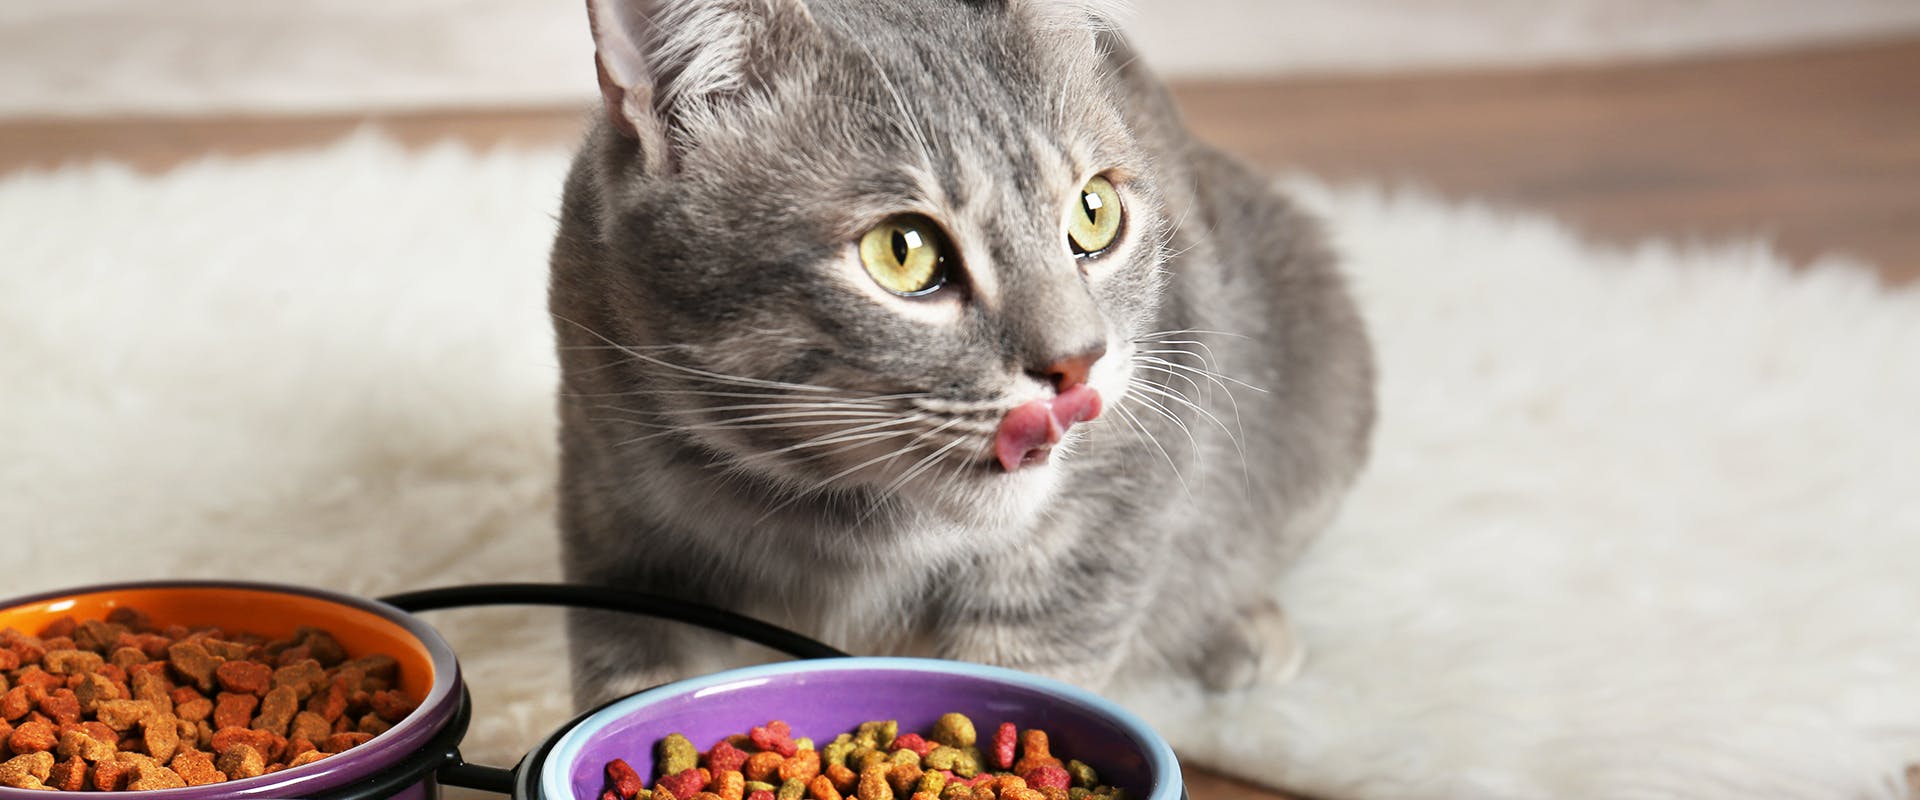 A cat eating its dinner, two bowls of healthy cat food in front of it